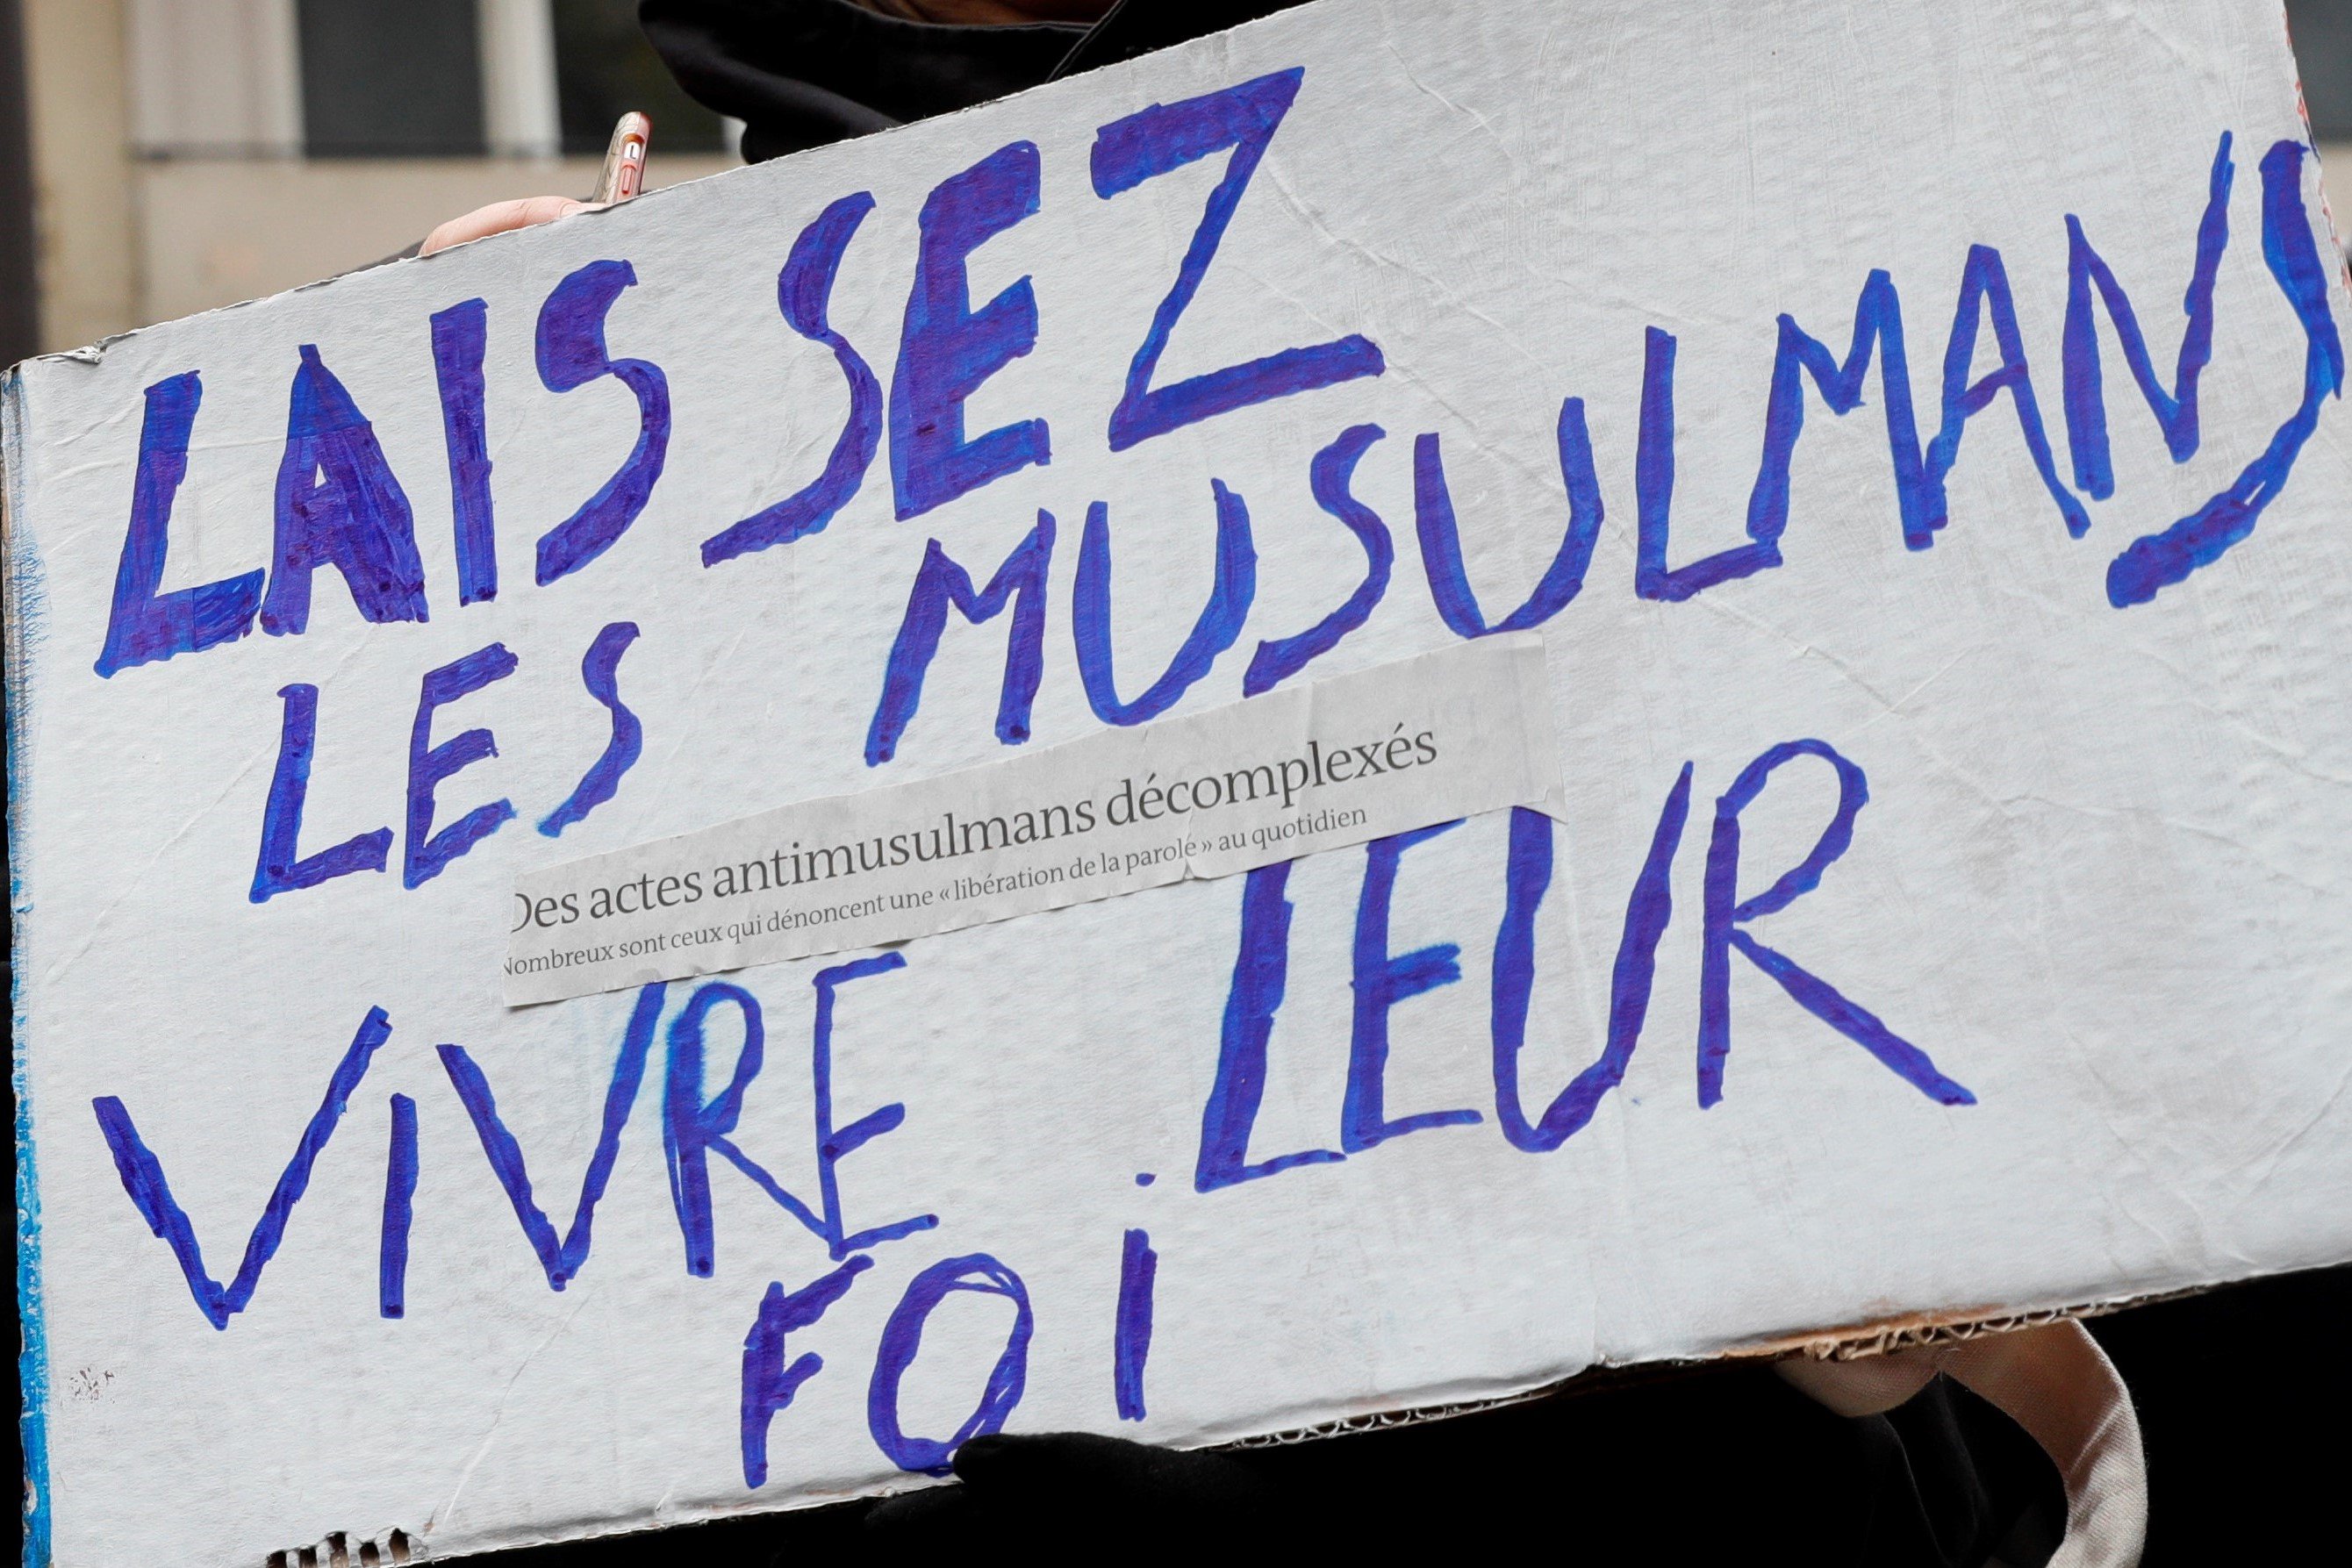 A placard held by a protester reads: "Let Muslims live their faith" during a march against Islamophobia in front of the Gare du Nord, in Paris on 10 November 2019 (AFP)